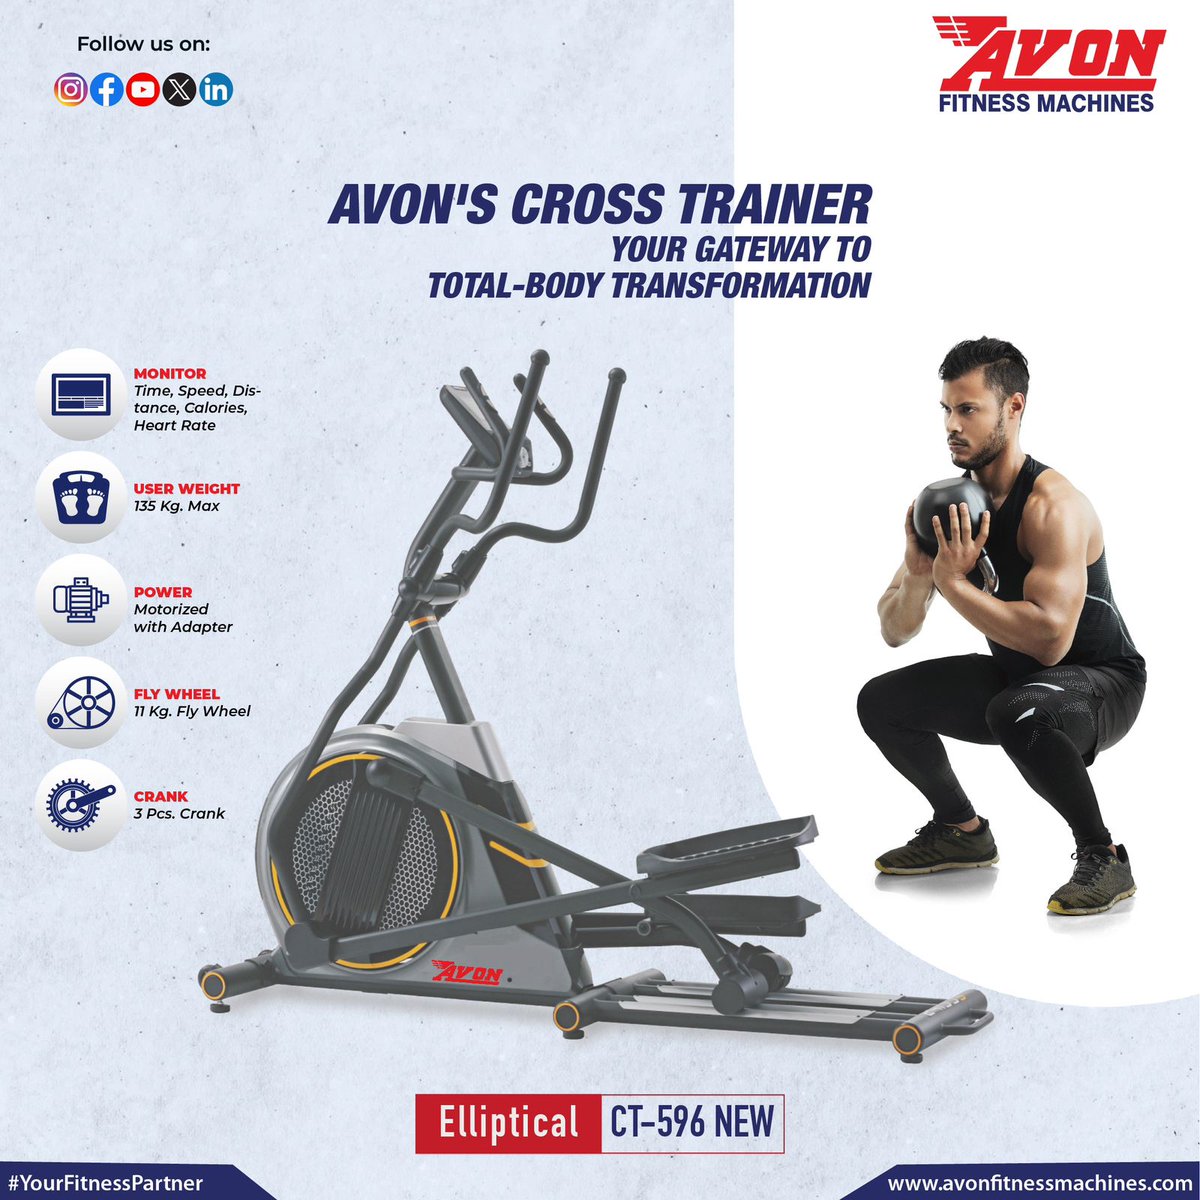 Elevate your fitness routine, transform your body, and experience the Avon difference. Invest in your health and wellness with the Avon Fitness where innovation meets results!

#chestpress #excercising #workoutmotivation #workoutspecialist #workoutroutine